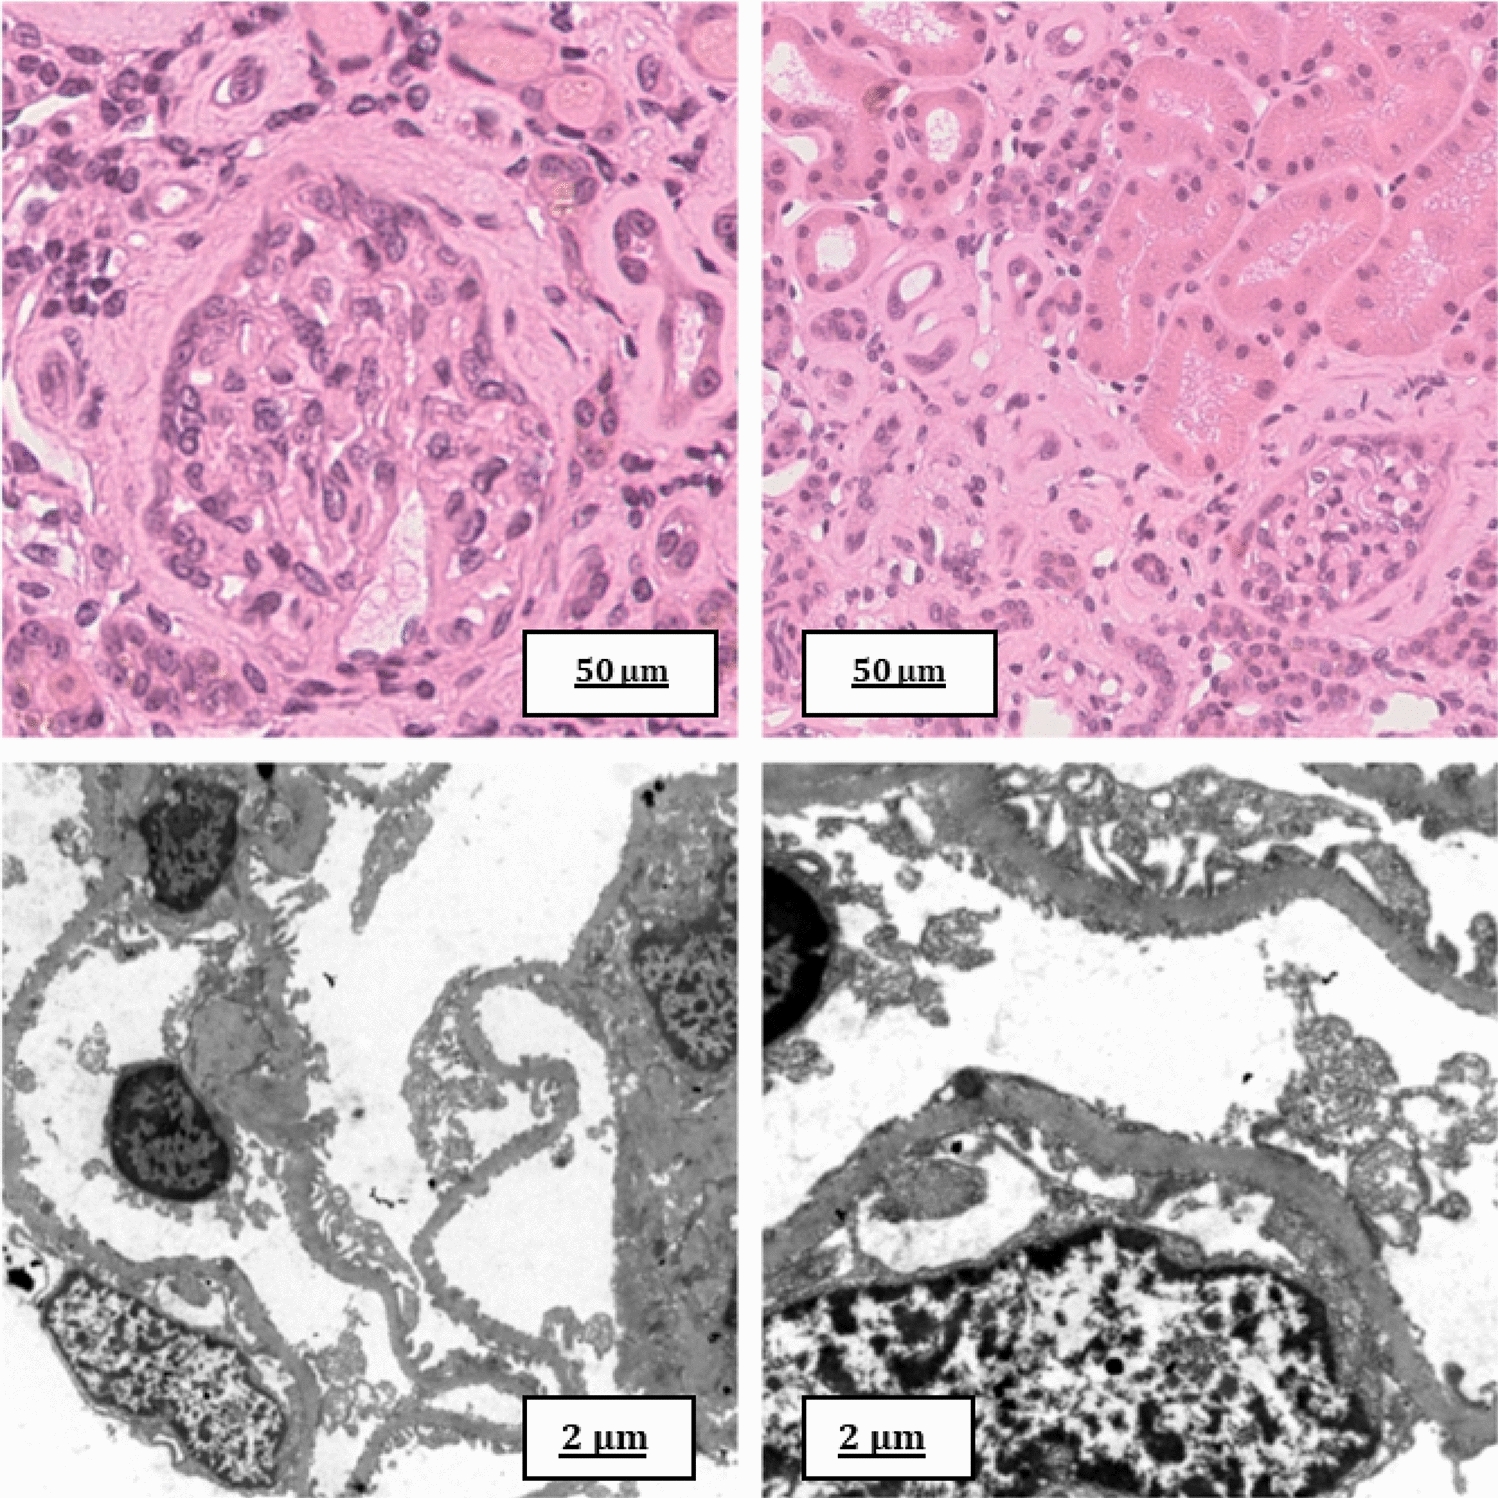 Kidney disease in acute intermittent porphyria: histological features and therapeutic perspectives